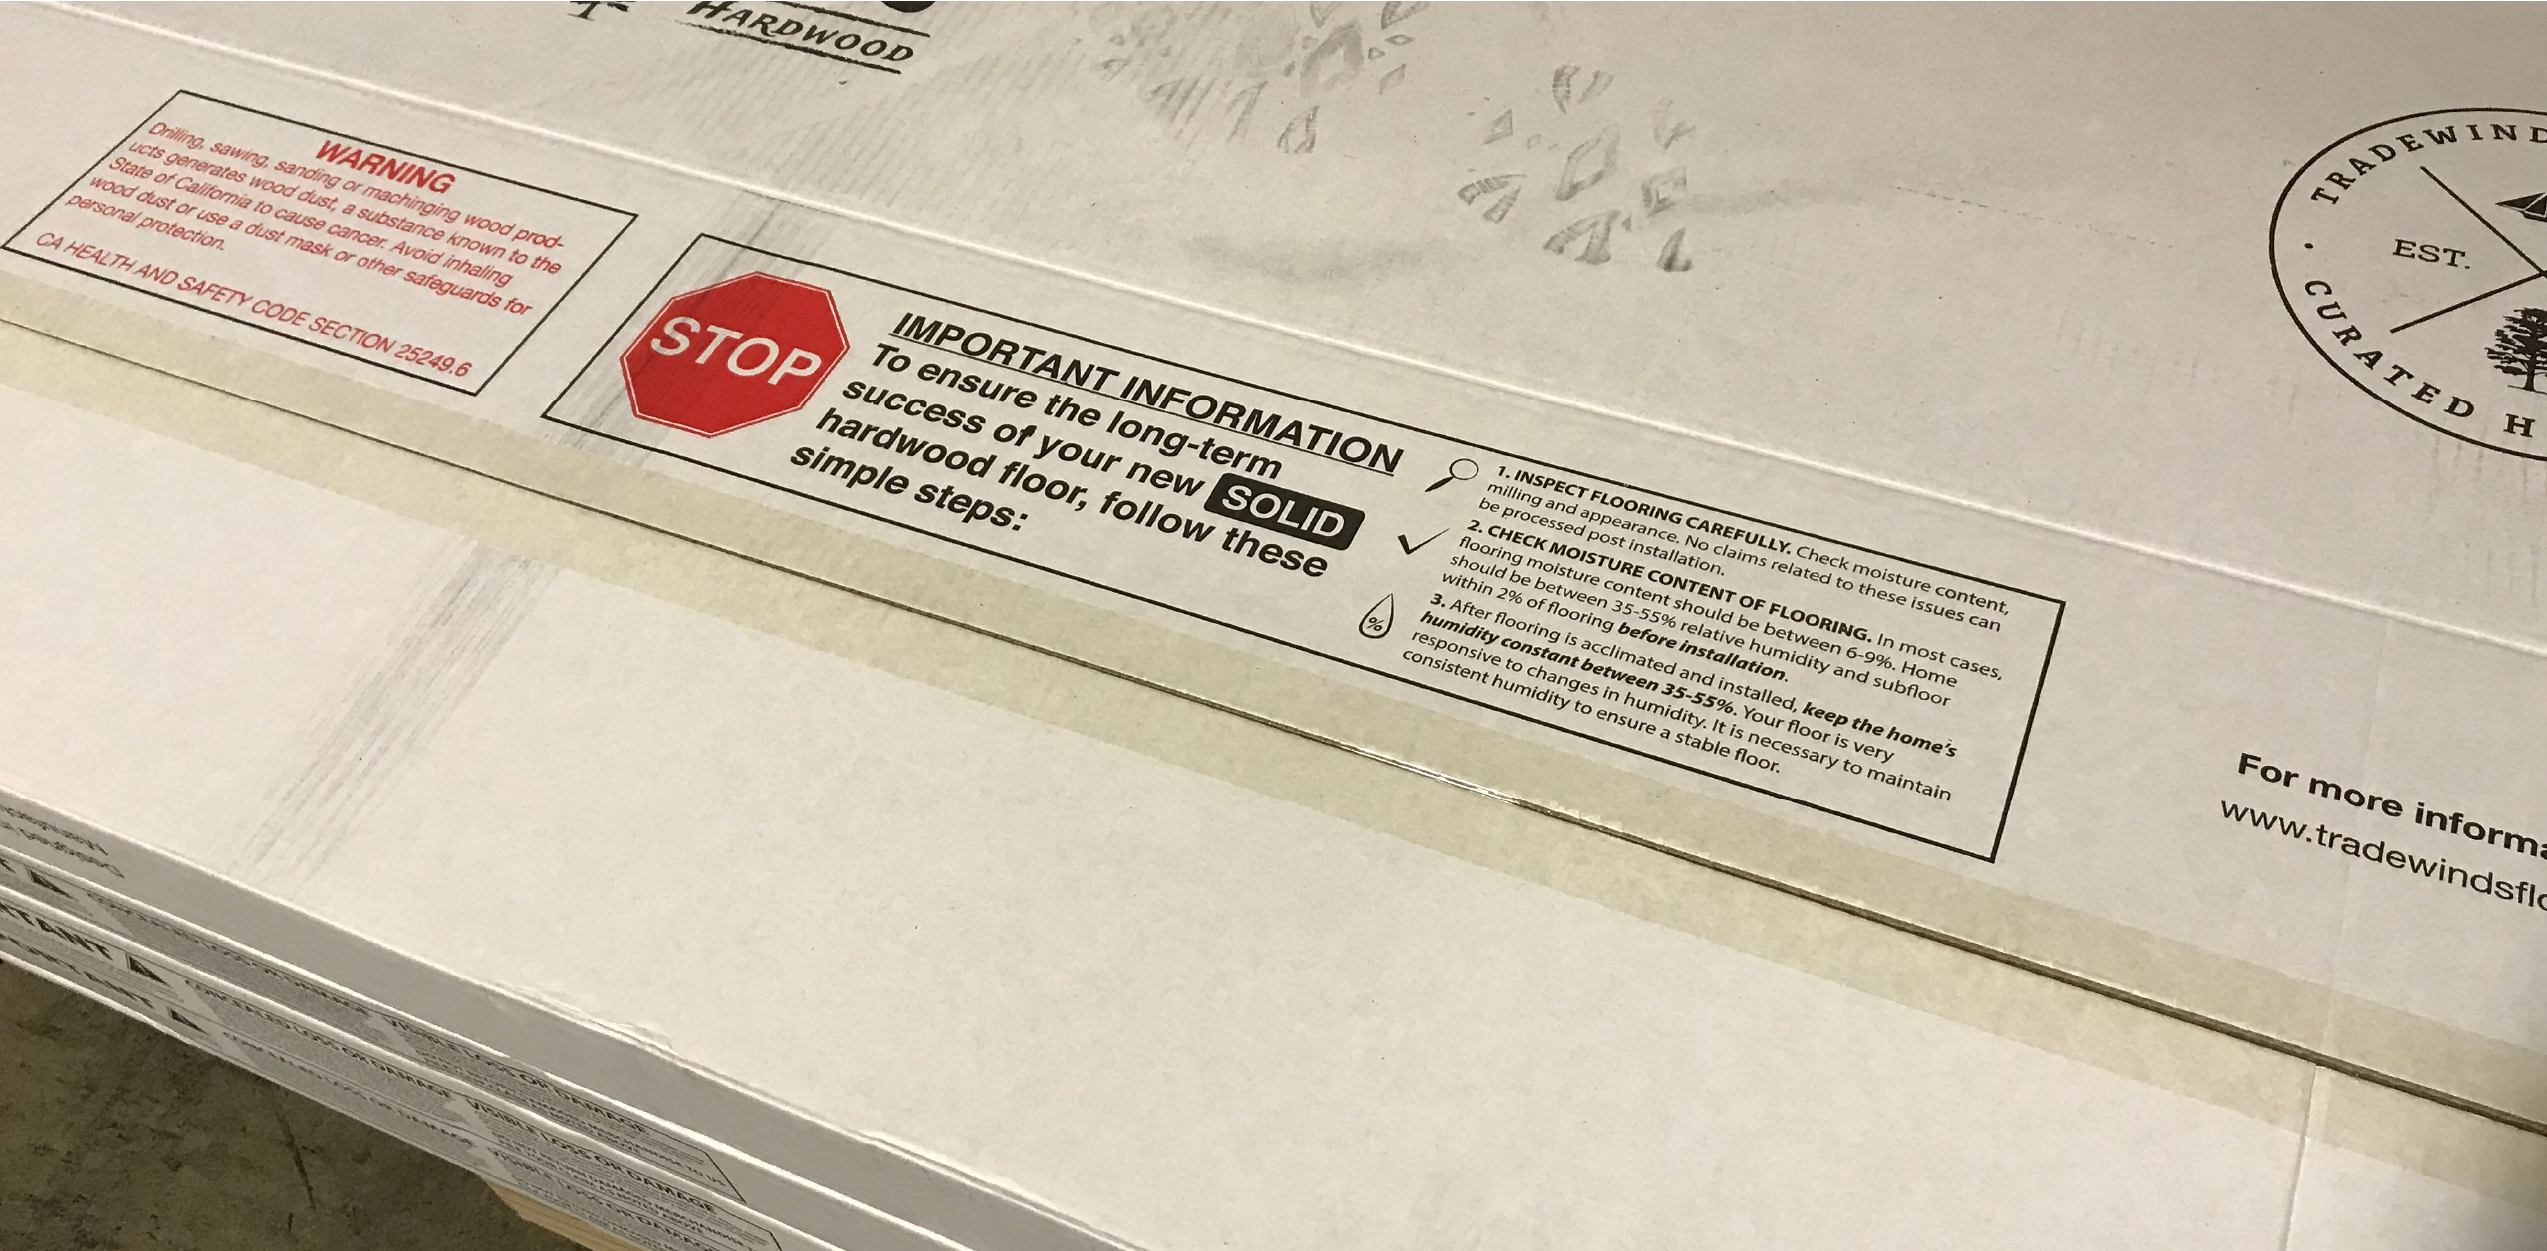 Our flooring boxes include special instructions that must be followed.